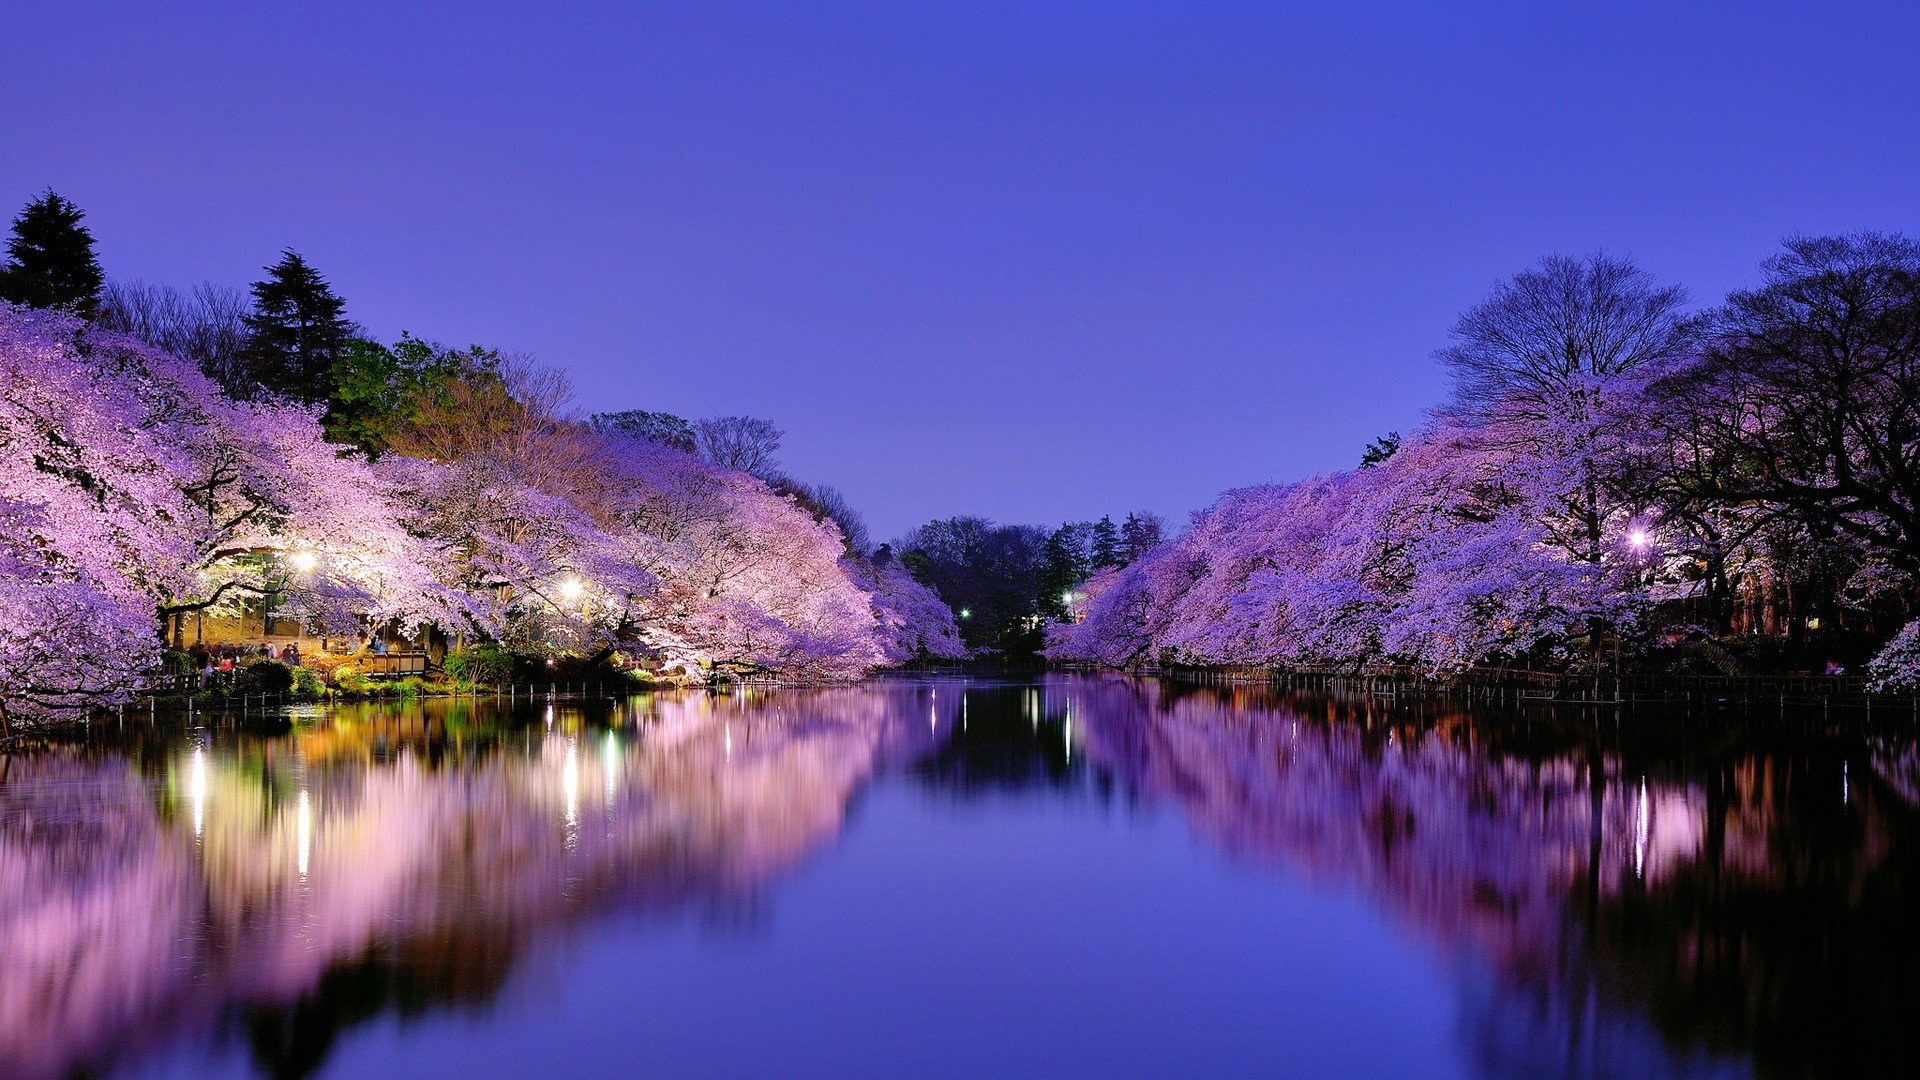 Load 26 More Imagesgrid View - Cherry Blossom River Background , HD Wallpaper & Backgrounds